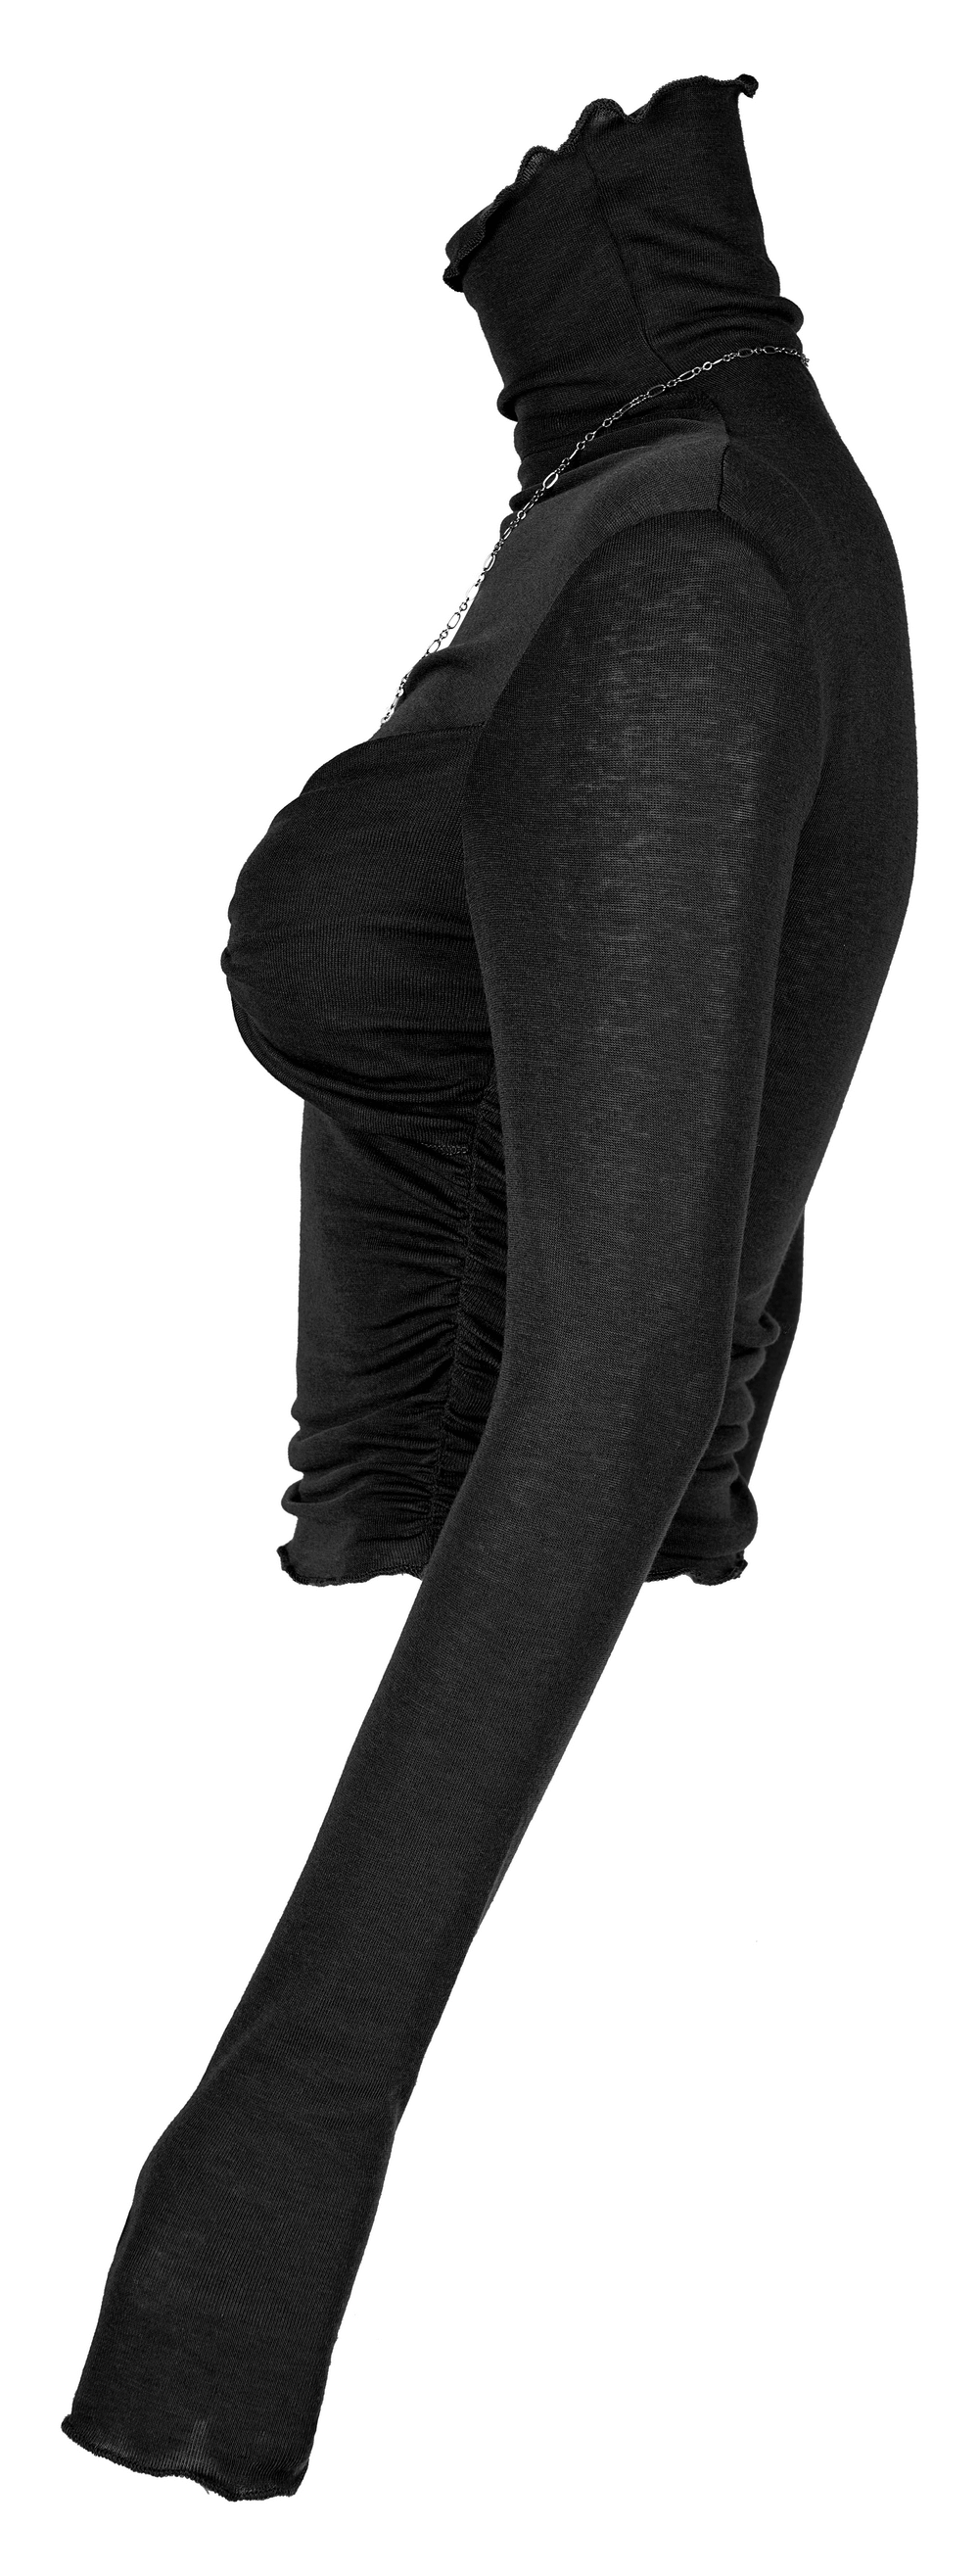 Gothic Women's Turtleneck with Front Bow Detail - HARD'N'HEAVY